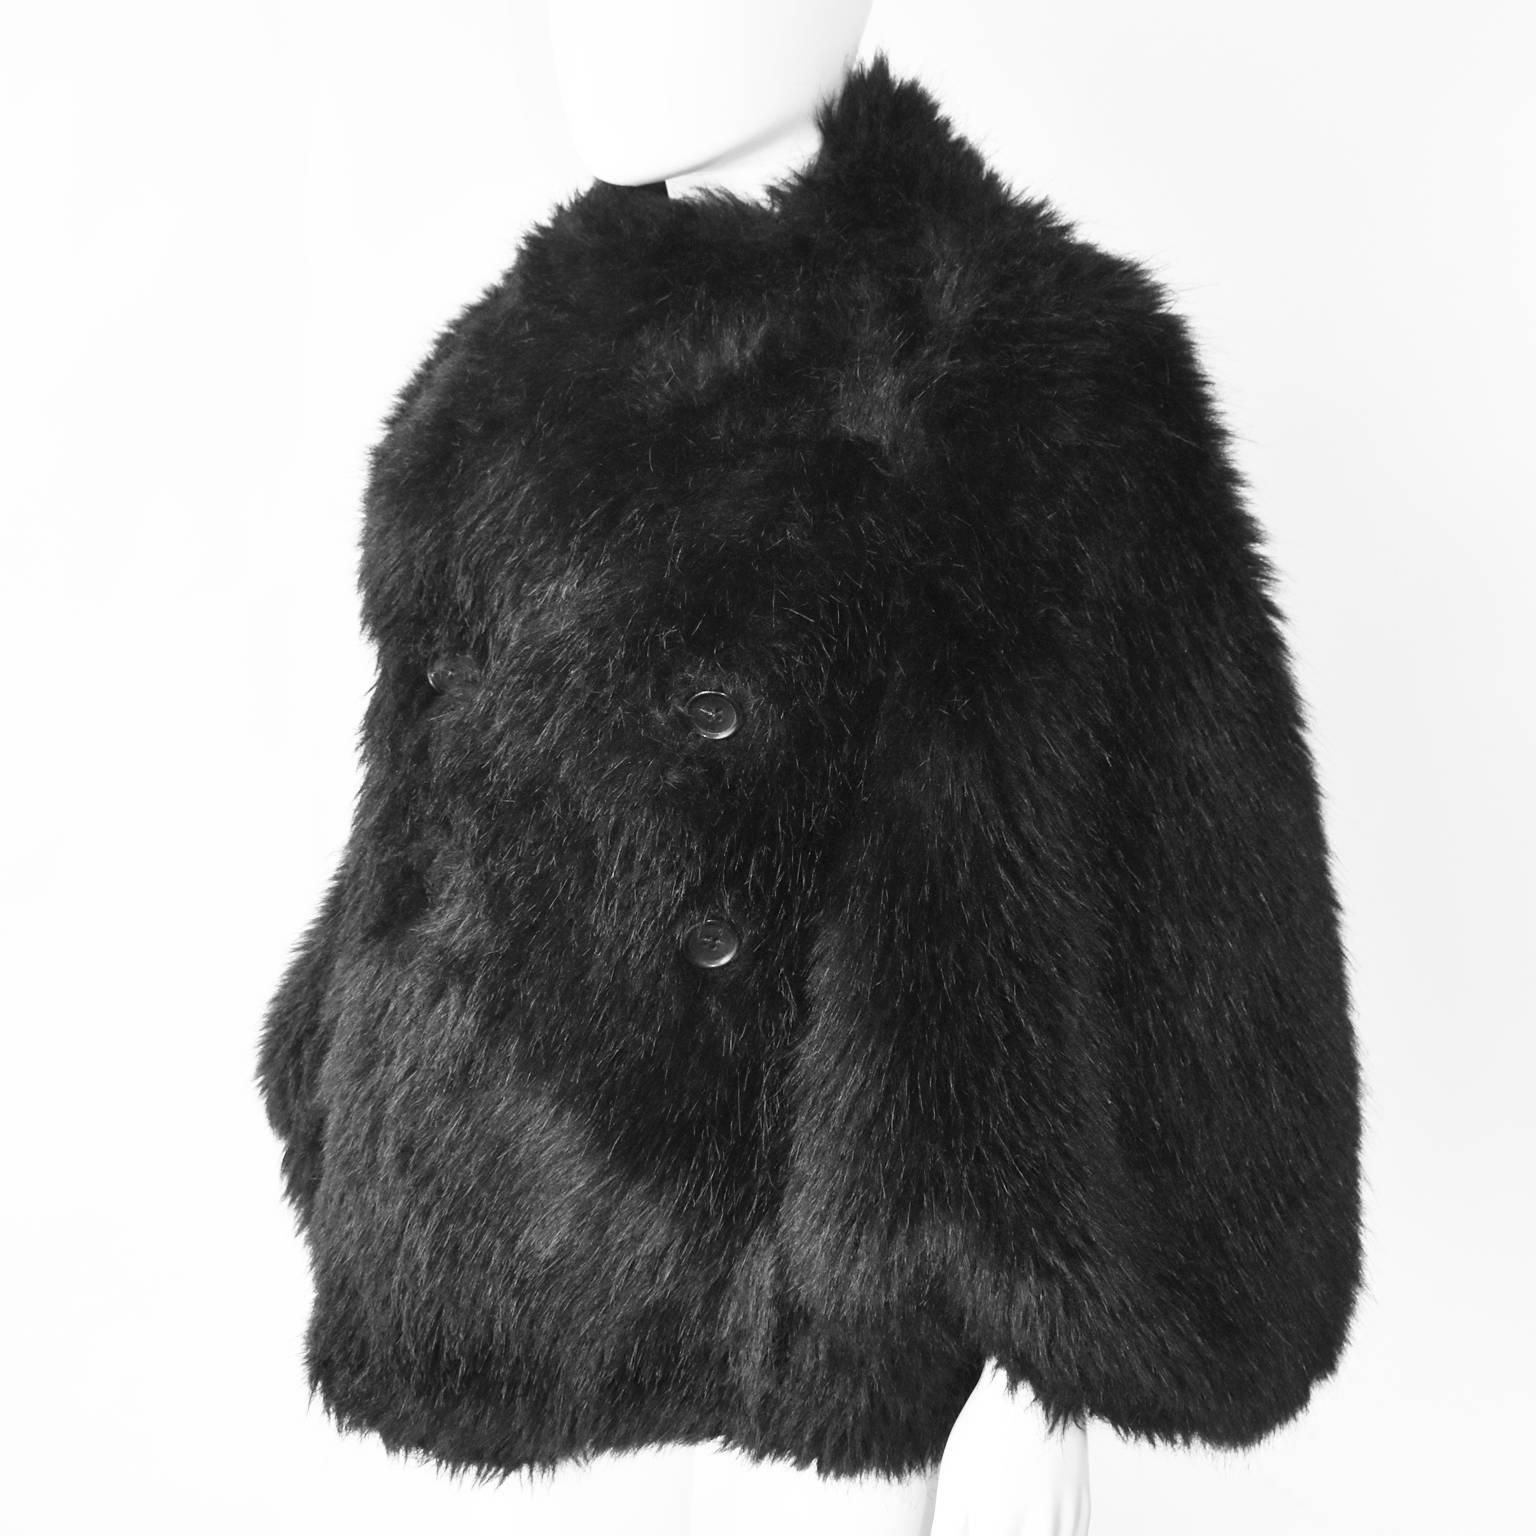 A black faux-fur cape-like double-breasted jacket with faux-leather lining by Junya Watanabe from 2011. It features large buttons, two tabs to inserts arms, two inside pockets and a shorter back hem. In excellent condition. It is an S, but can fit a